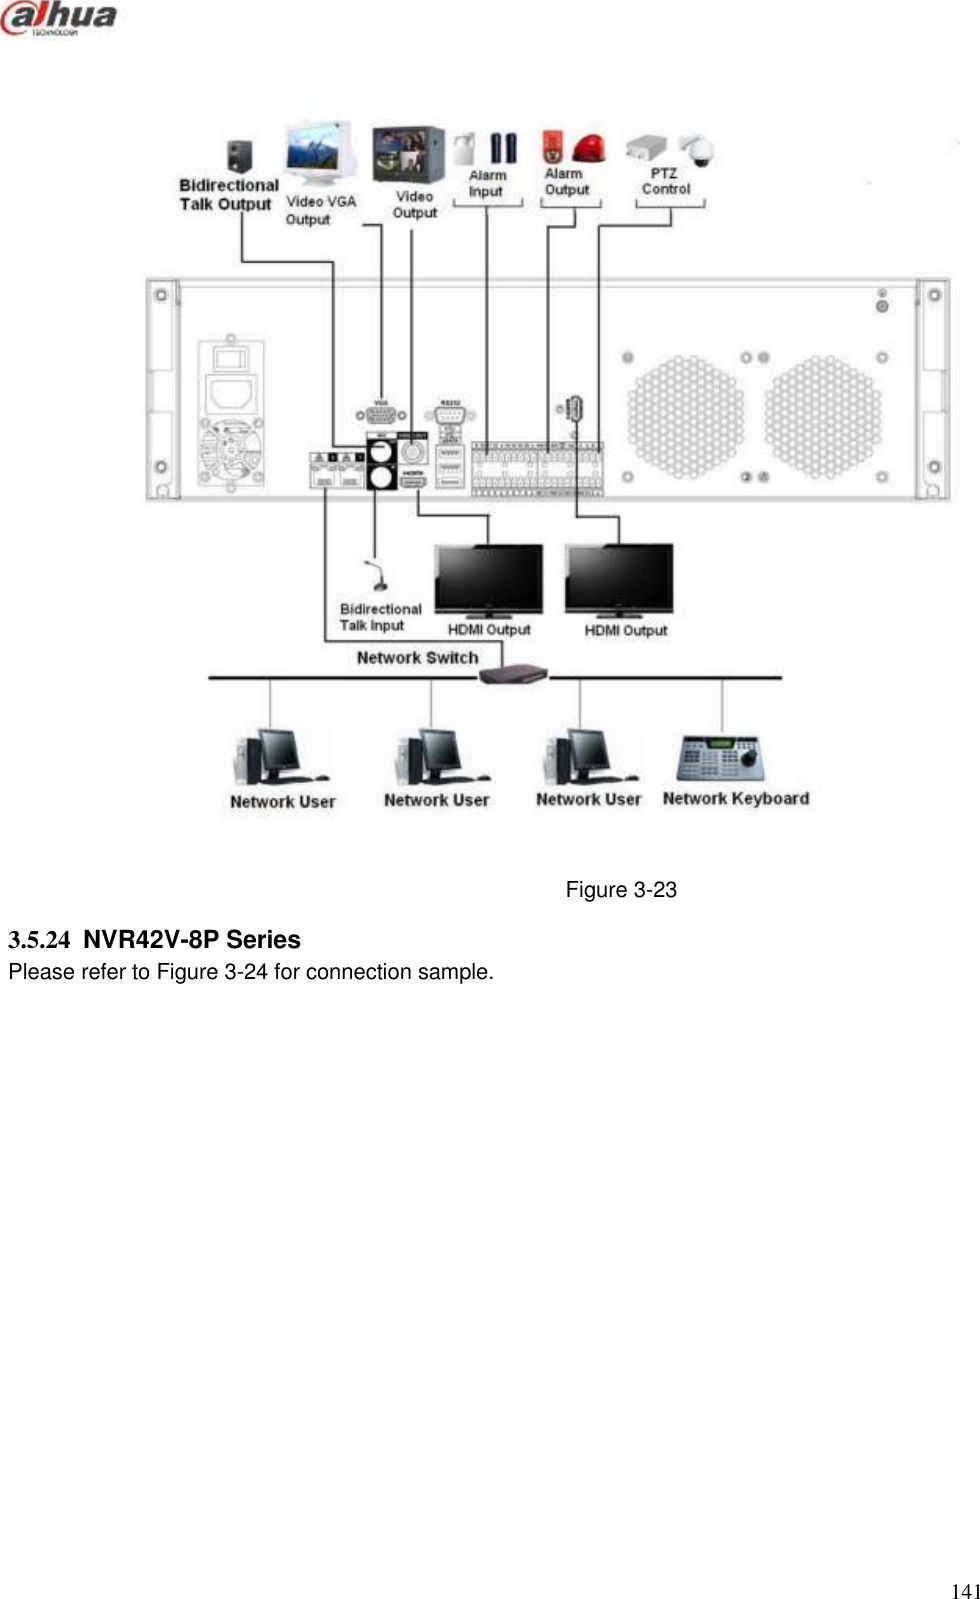  141   Figure 3-23 3.5.24  NVR42V-8P Series   Please refer to Figure 3-24 for connection sample.  